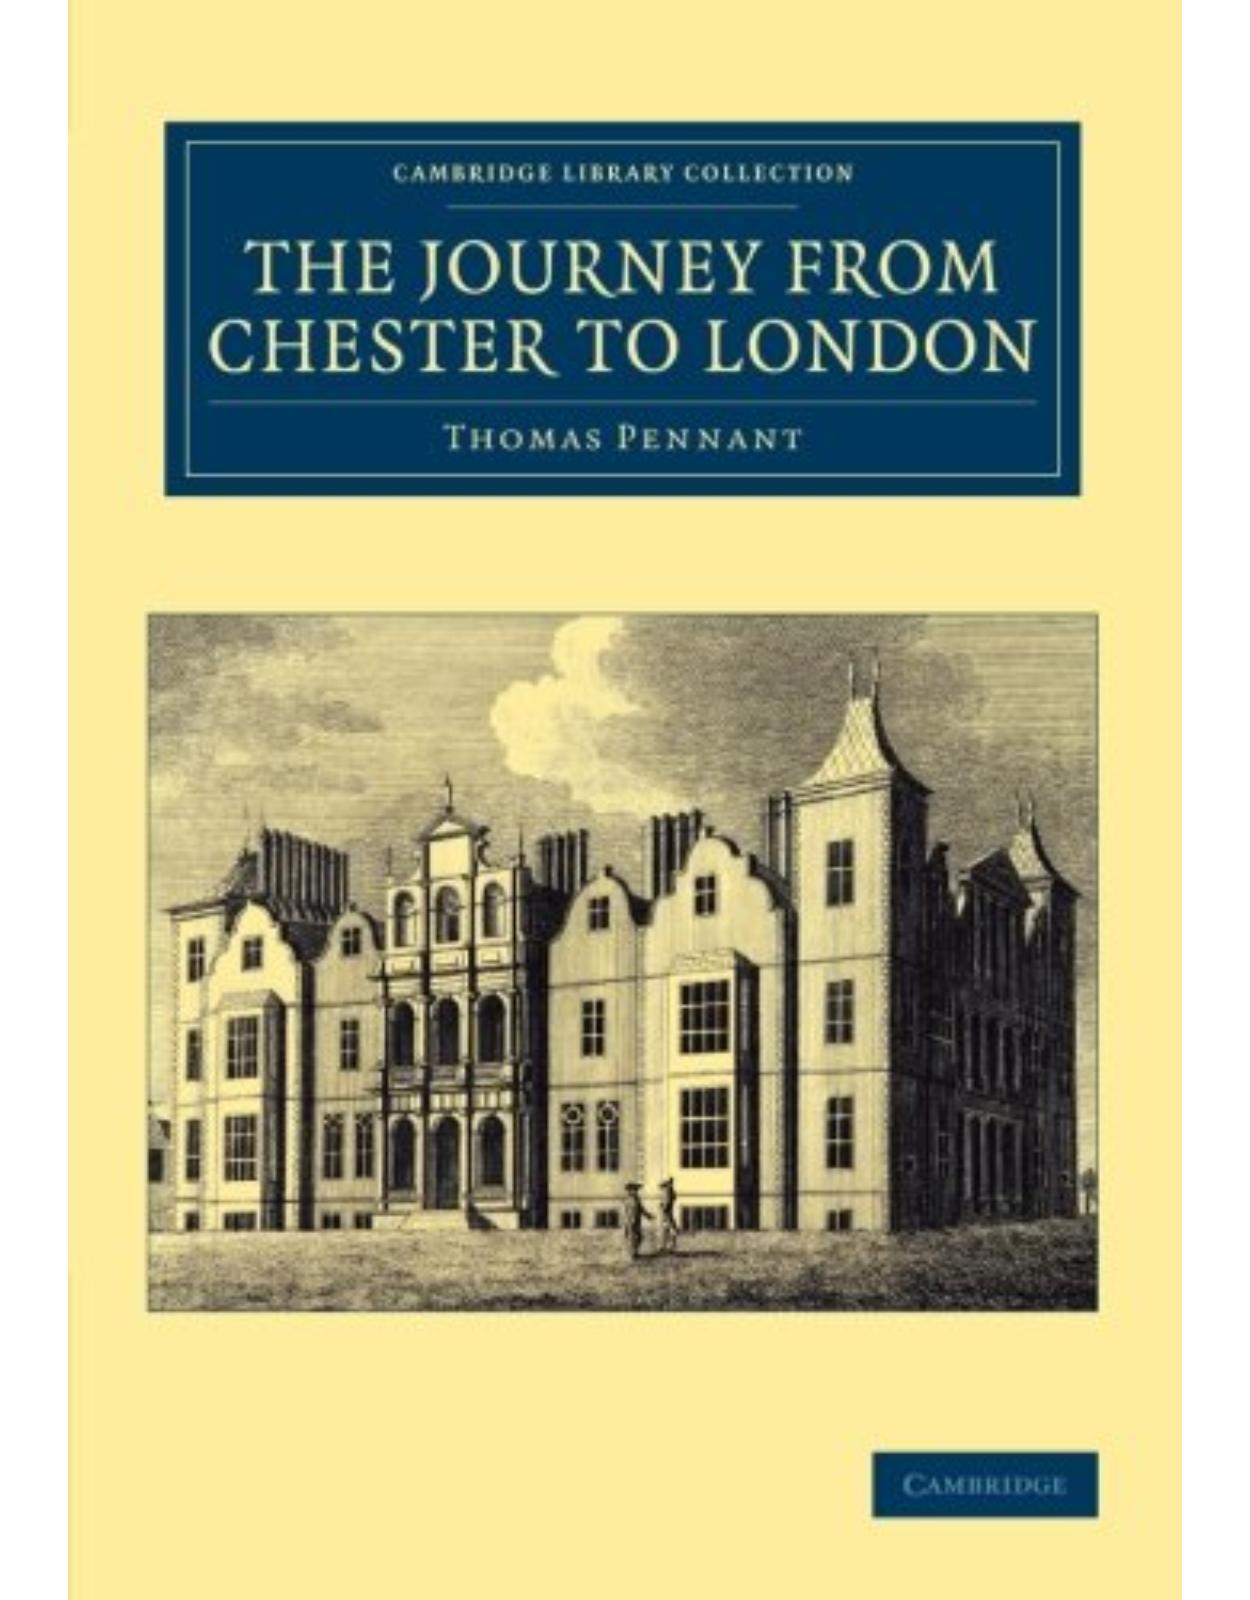 The Journey from Chester to London (Cambridge Library Collection - British & Irish History, 17th & 18th Centuries)